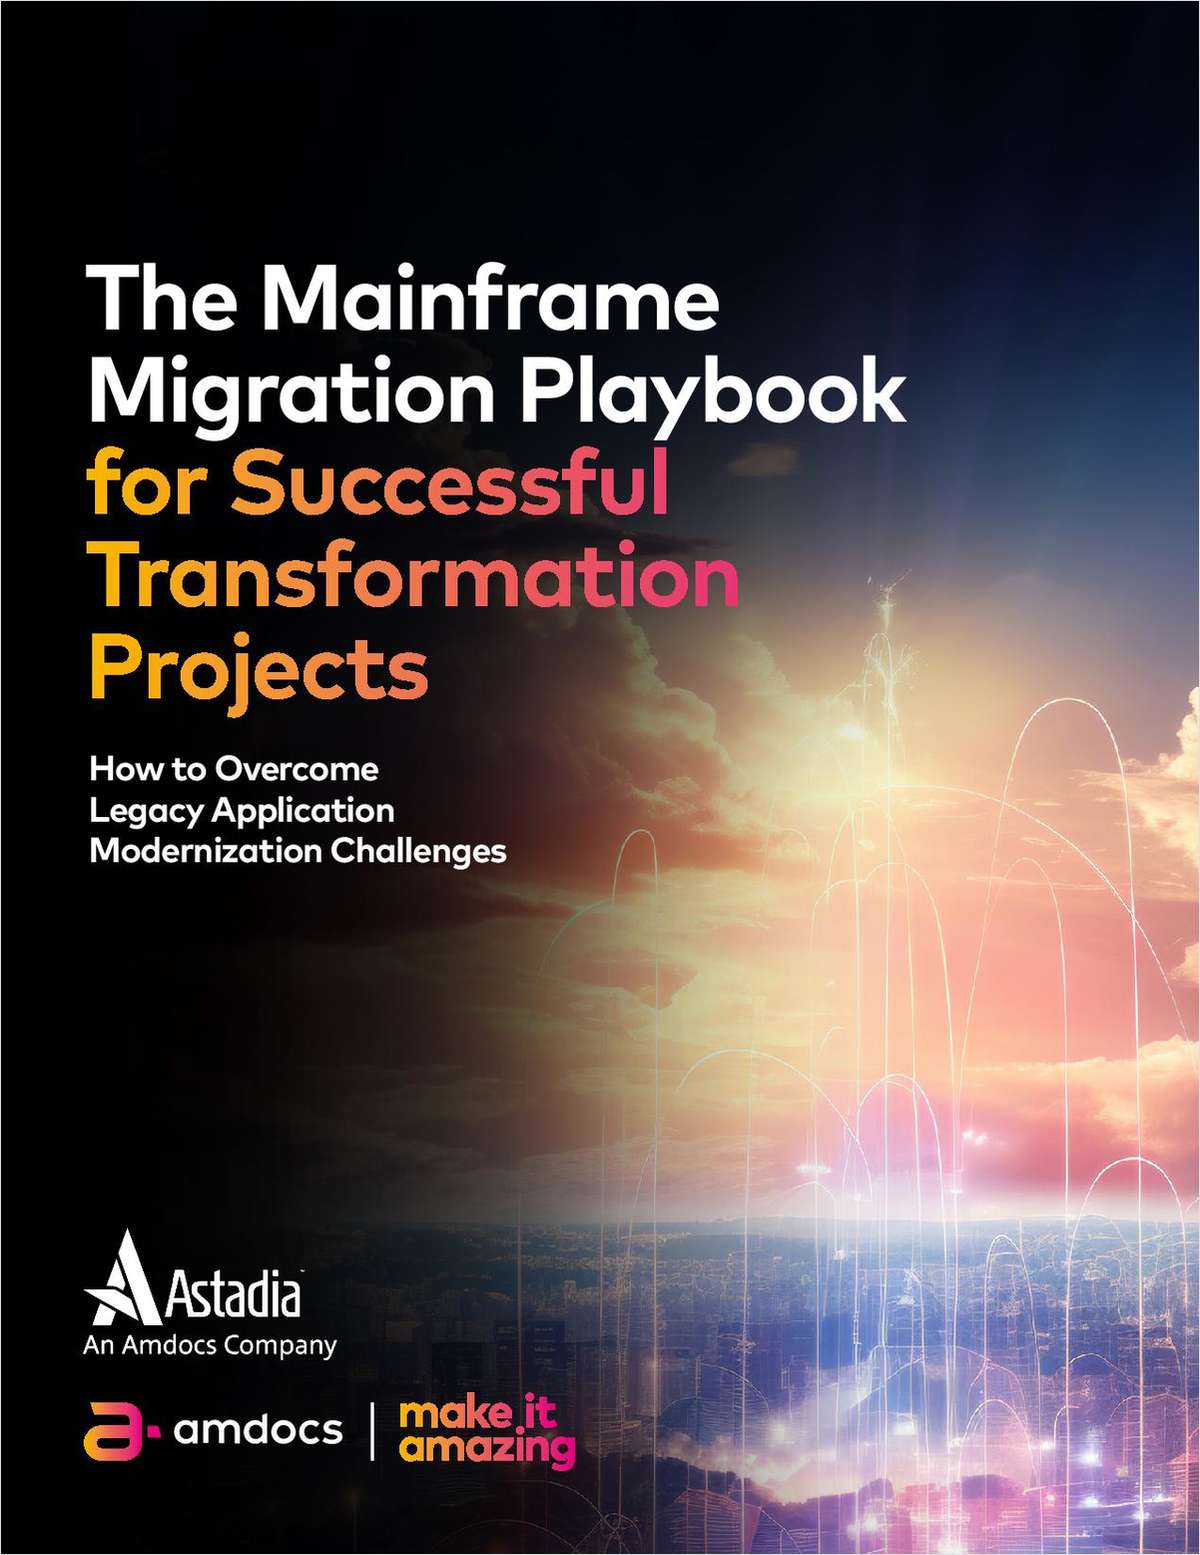 The mainframe migration playbook for successful transformation projects